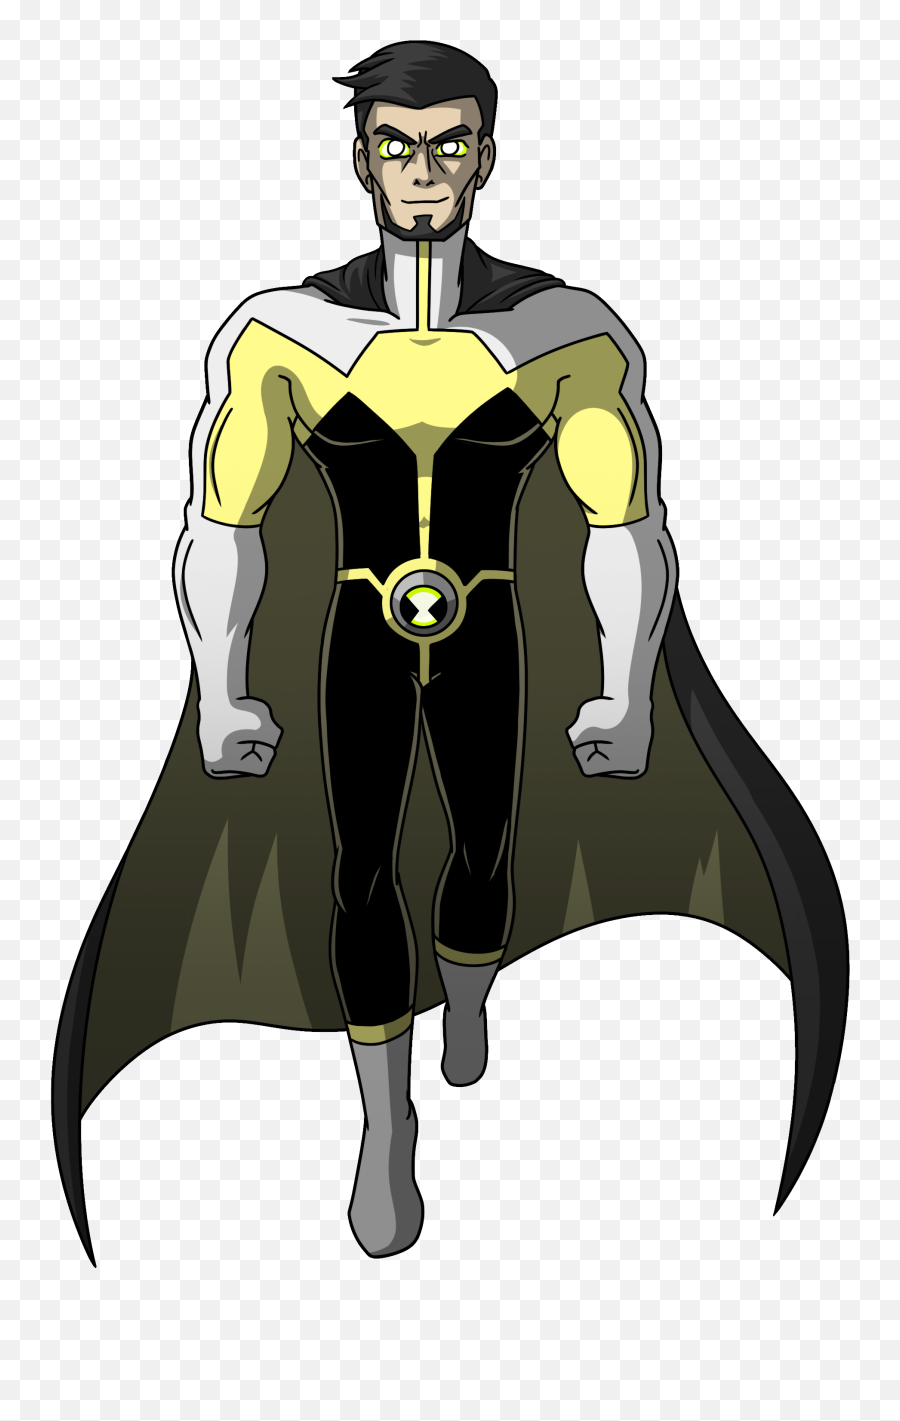 What If Ben Tennyson Became A Member Of The Justice League Emoji,Martian Manhunter Png